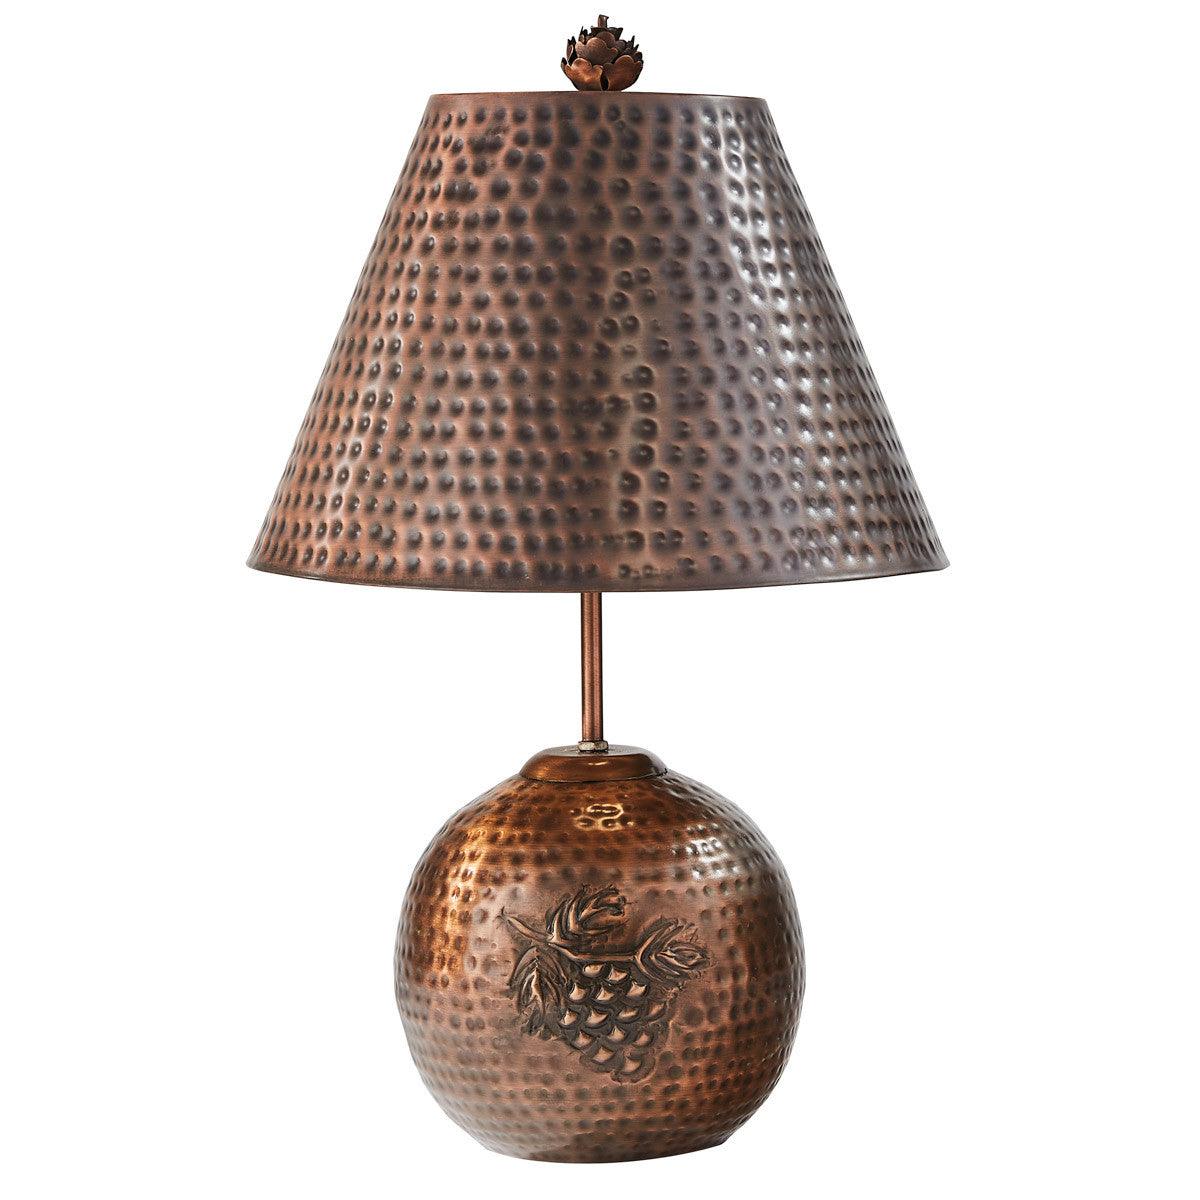 Valley Pine Hammered Copper Lamp with Shade - Park Designs - The Fox Decor